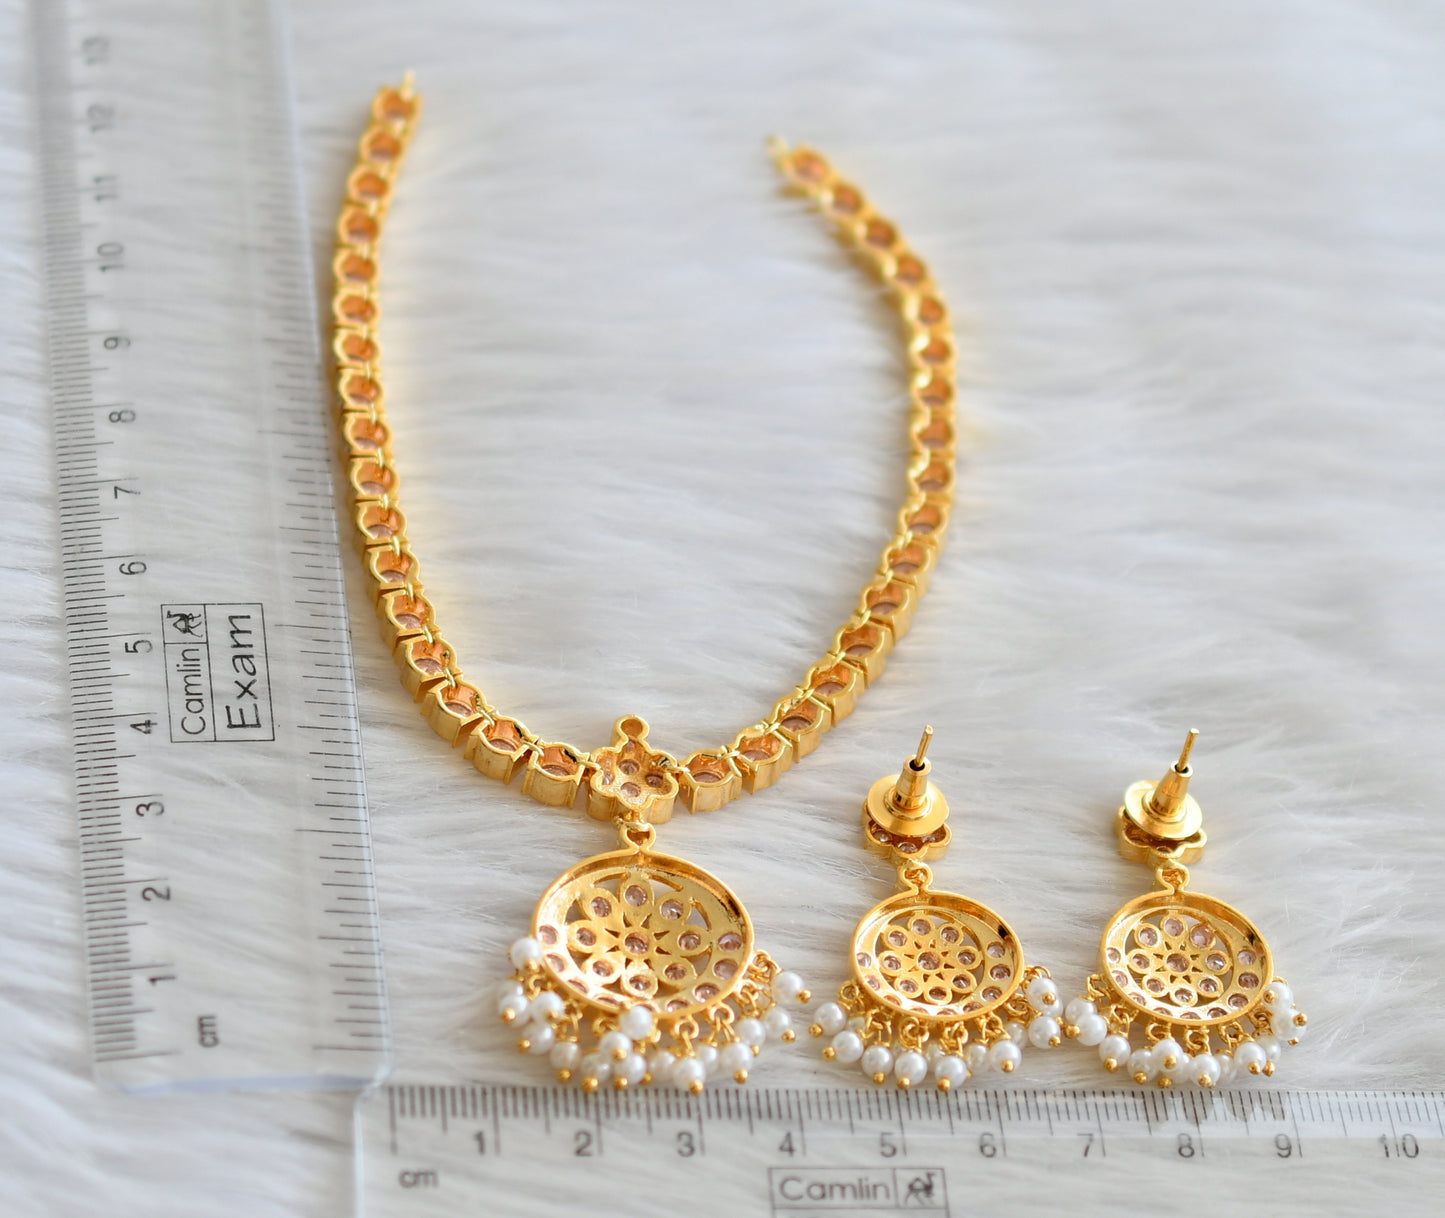 Gold tone ad baby pink south indian style attigai/necklace set dj-45884